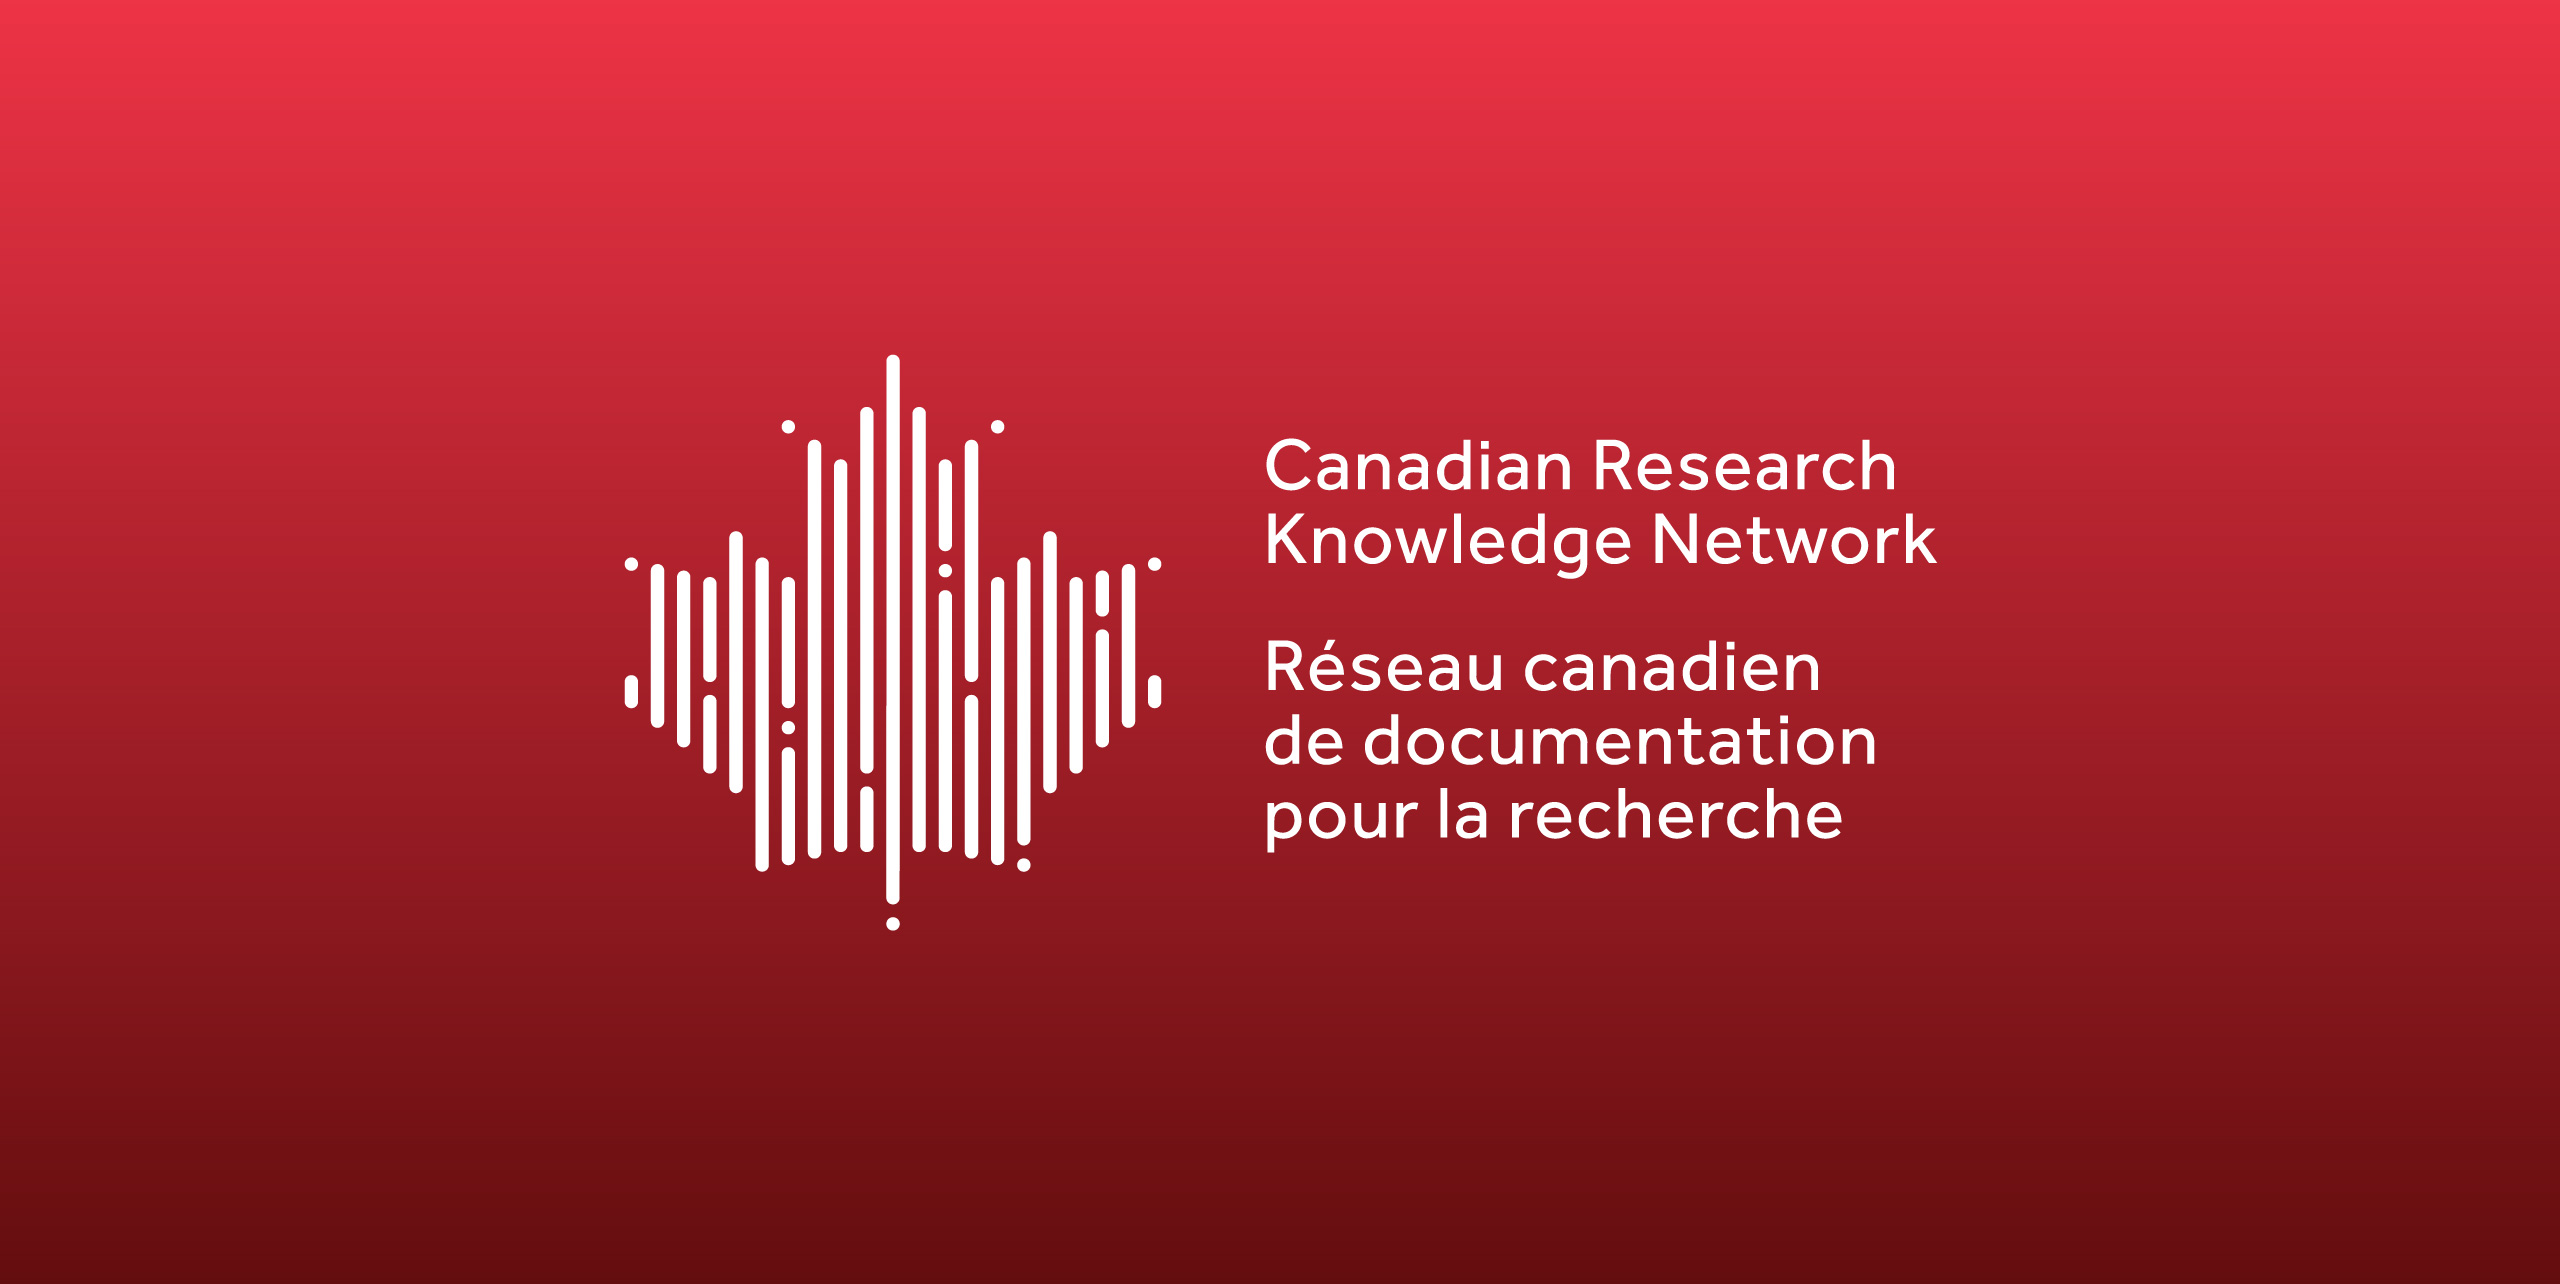 Canadian Research Knowledge Network